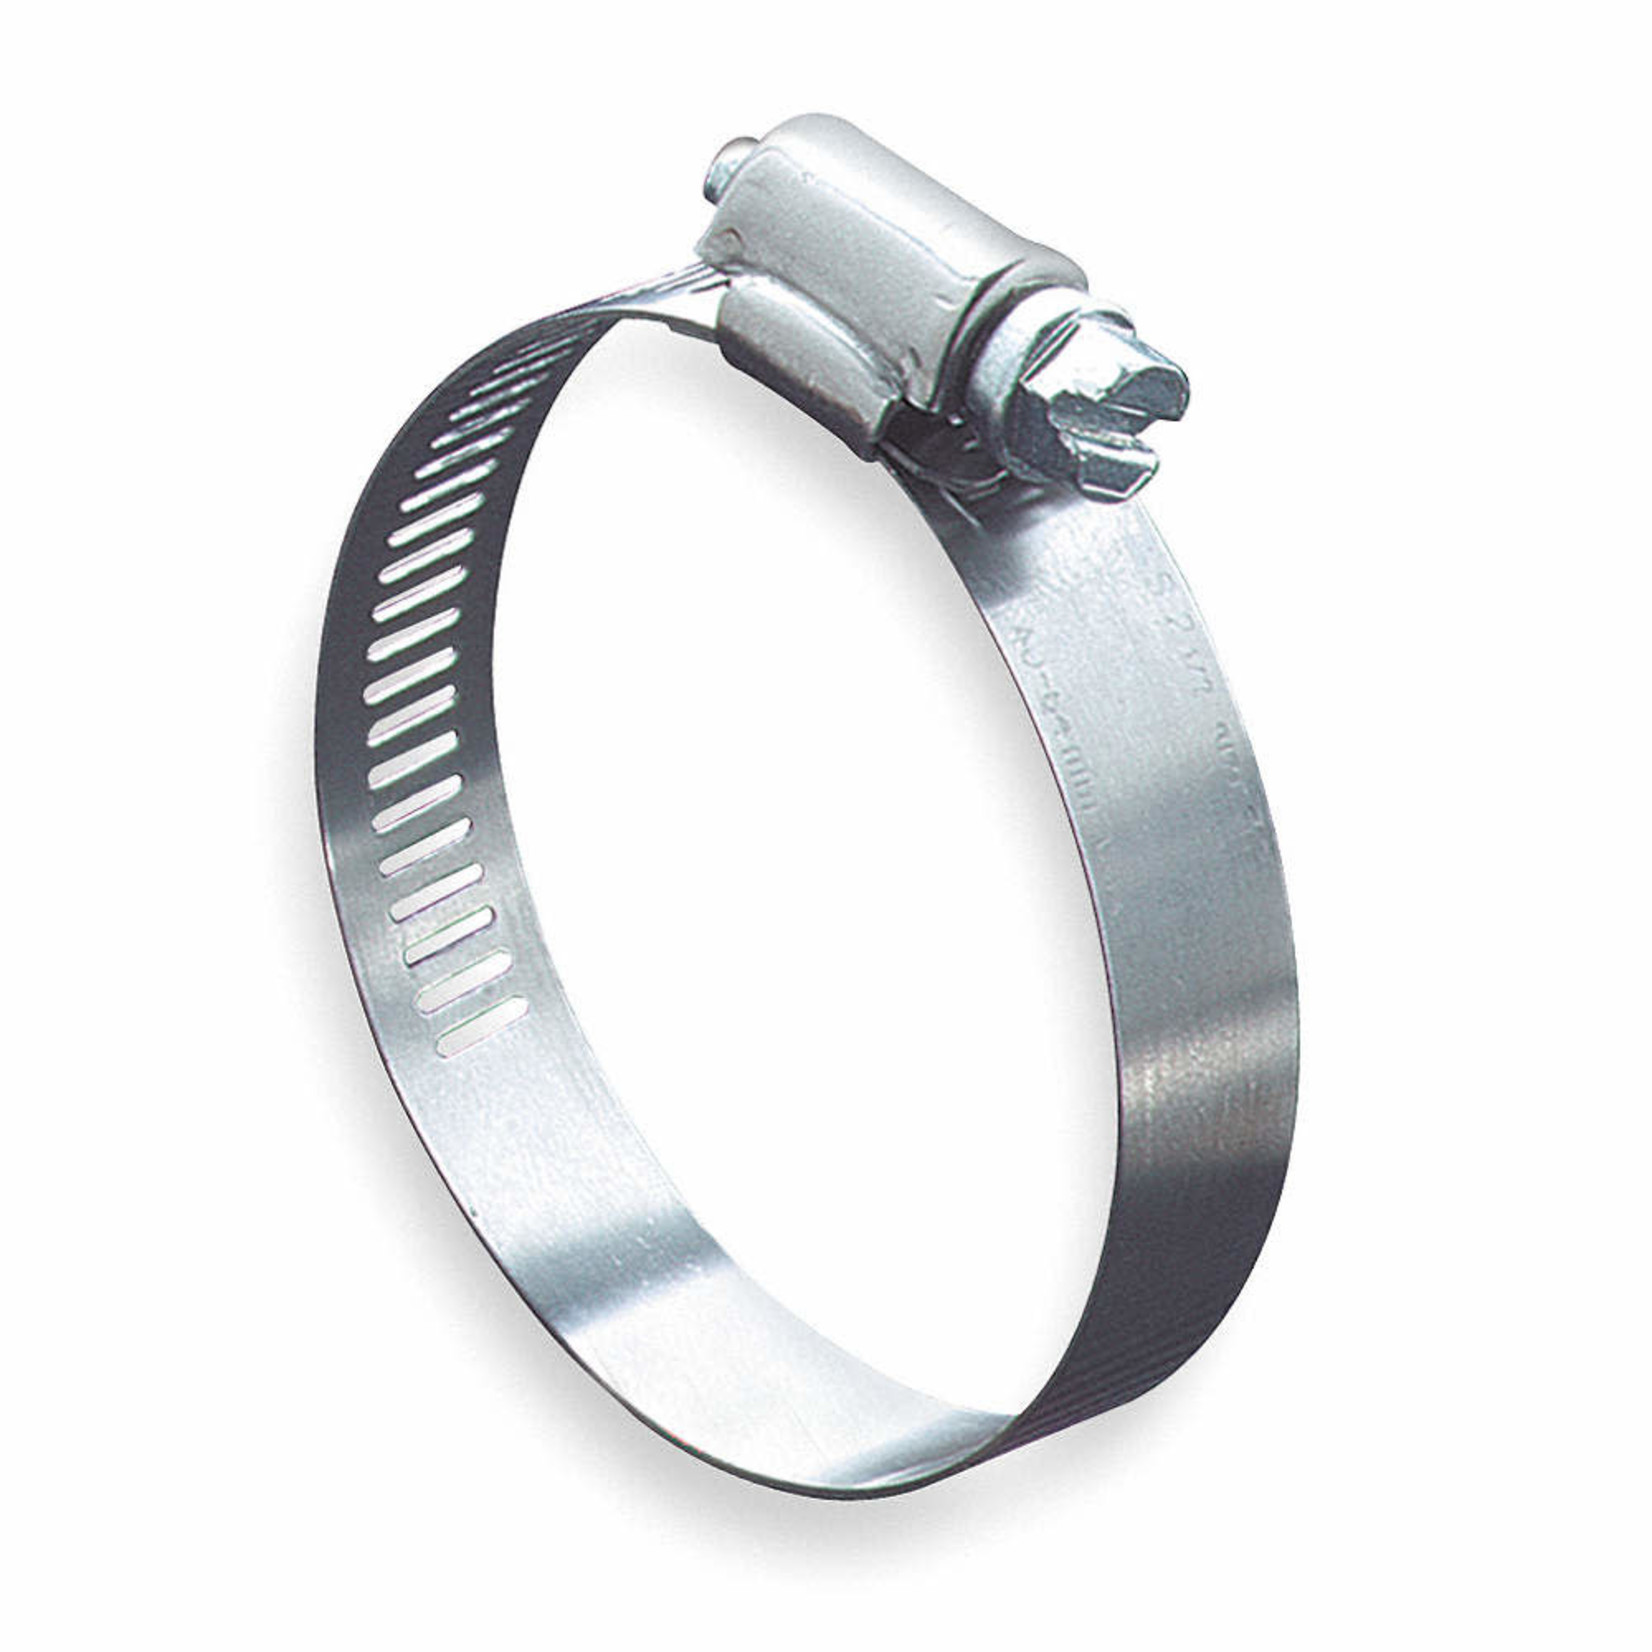 Waterline Stainless Steel Hose Clamp - 3/4in to 1-1/2in